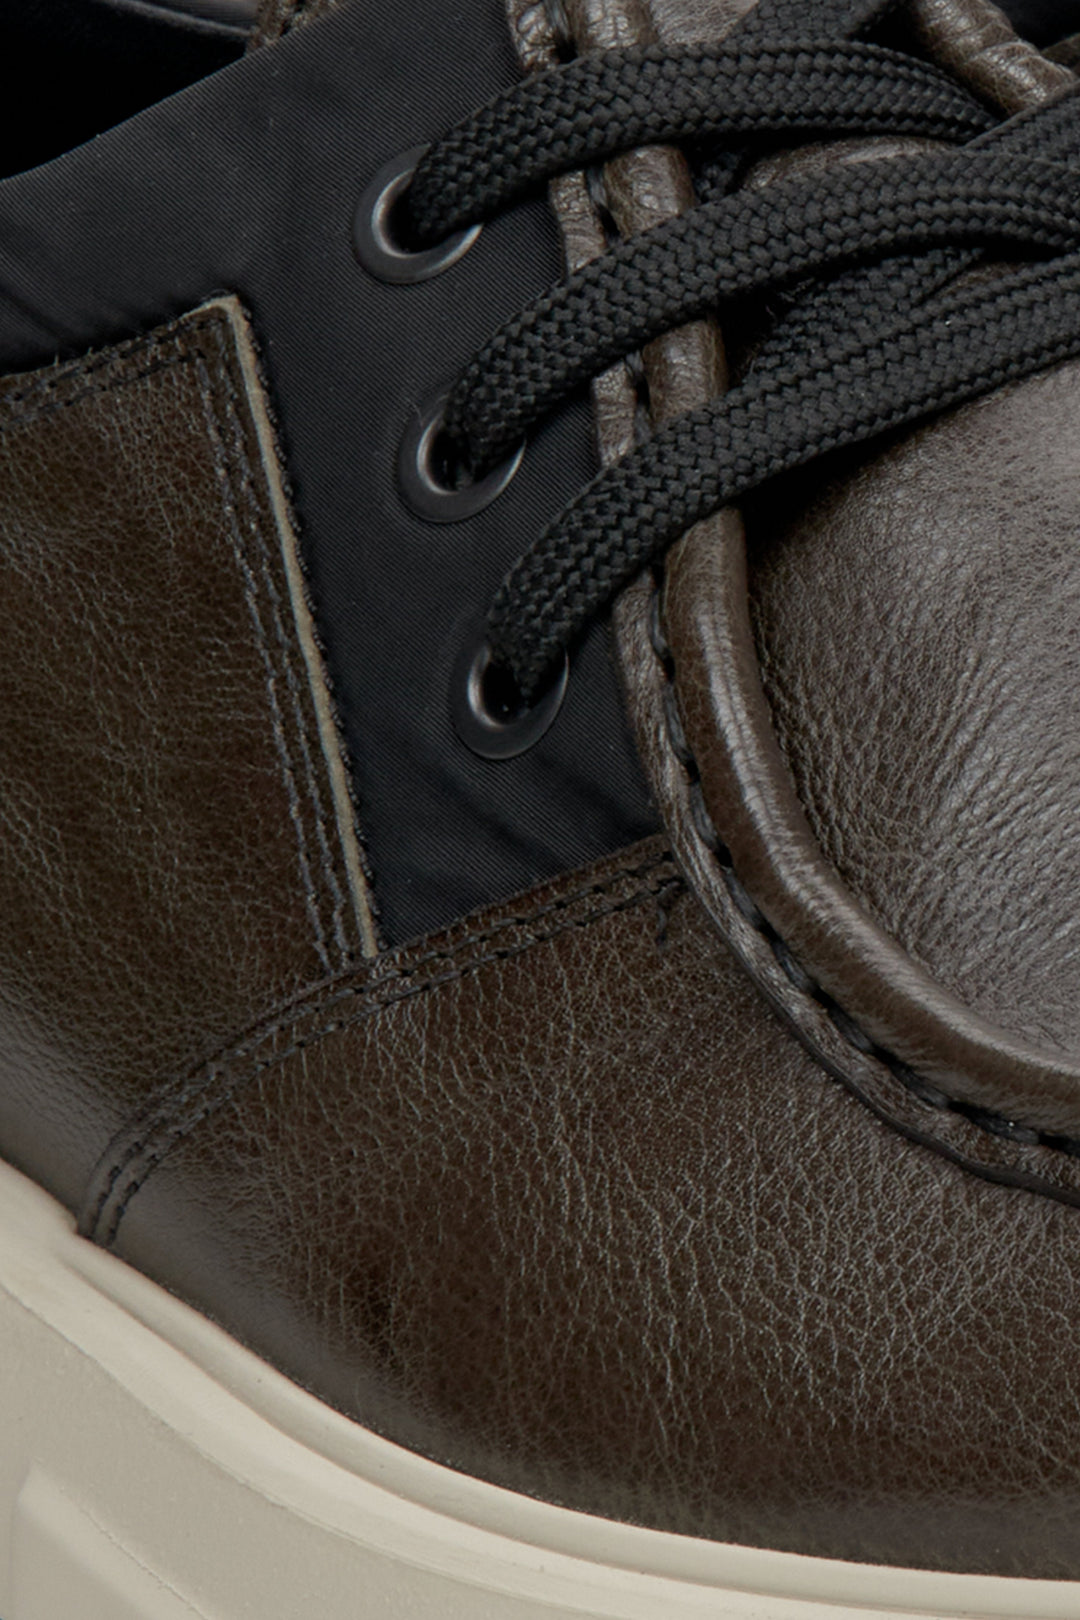 Men's dark green shoes on a stable sole by Estro - close-up on the detail.